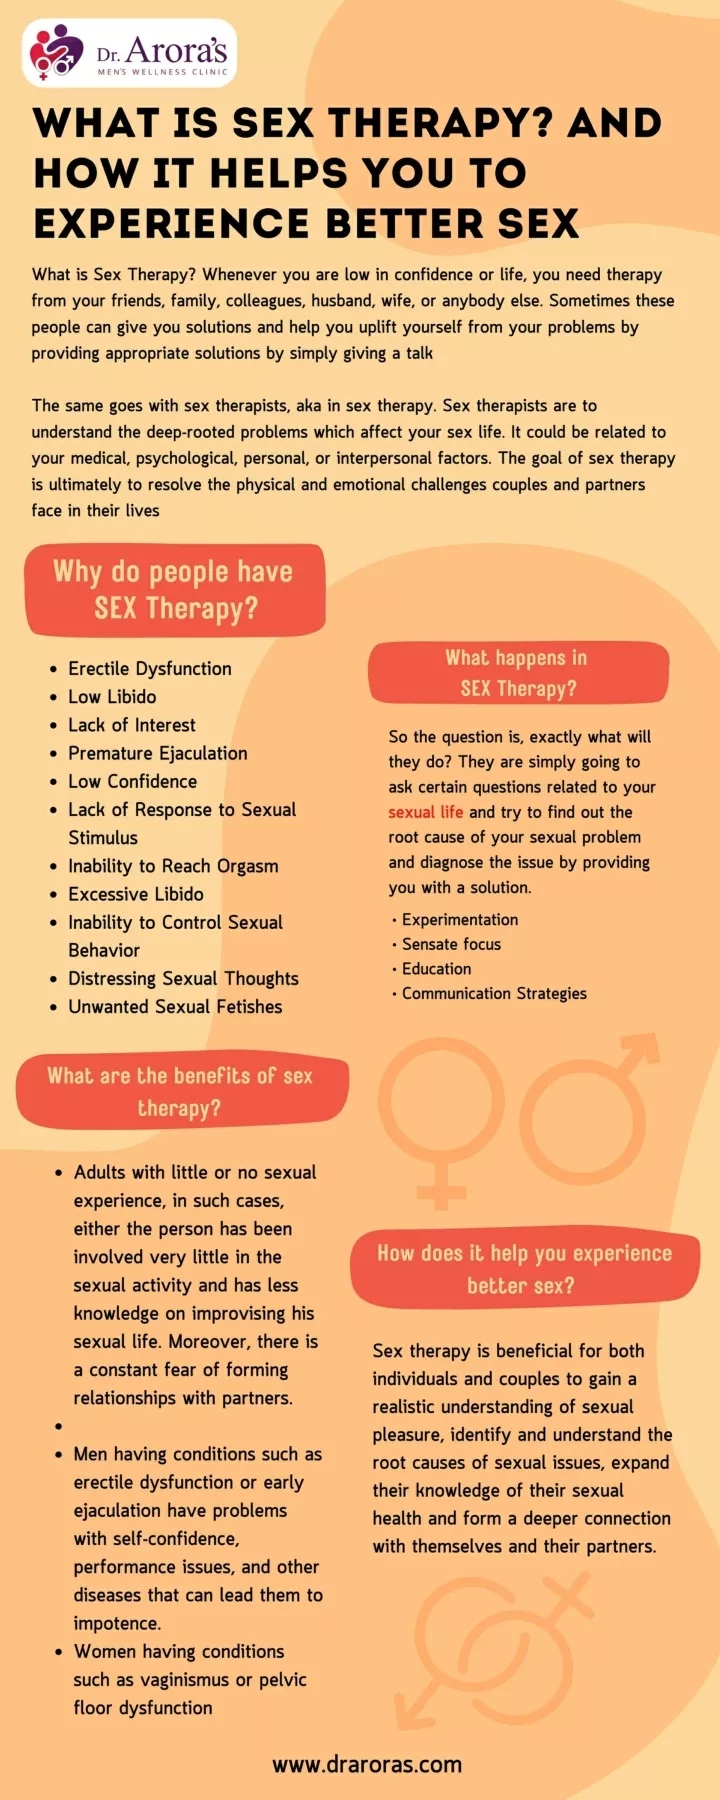 Ppt How Does It Help You Experience Better Sex Powerpoint Presentation Id 11489684